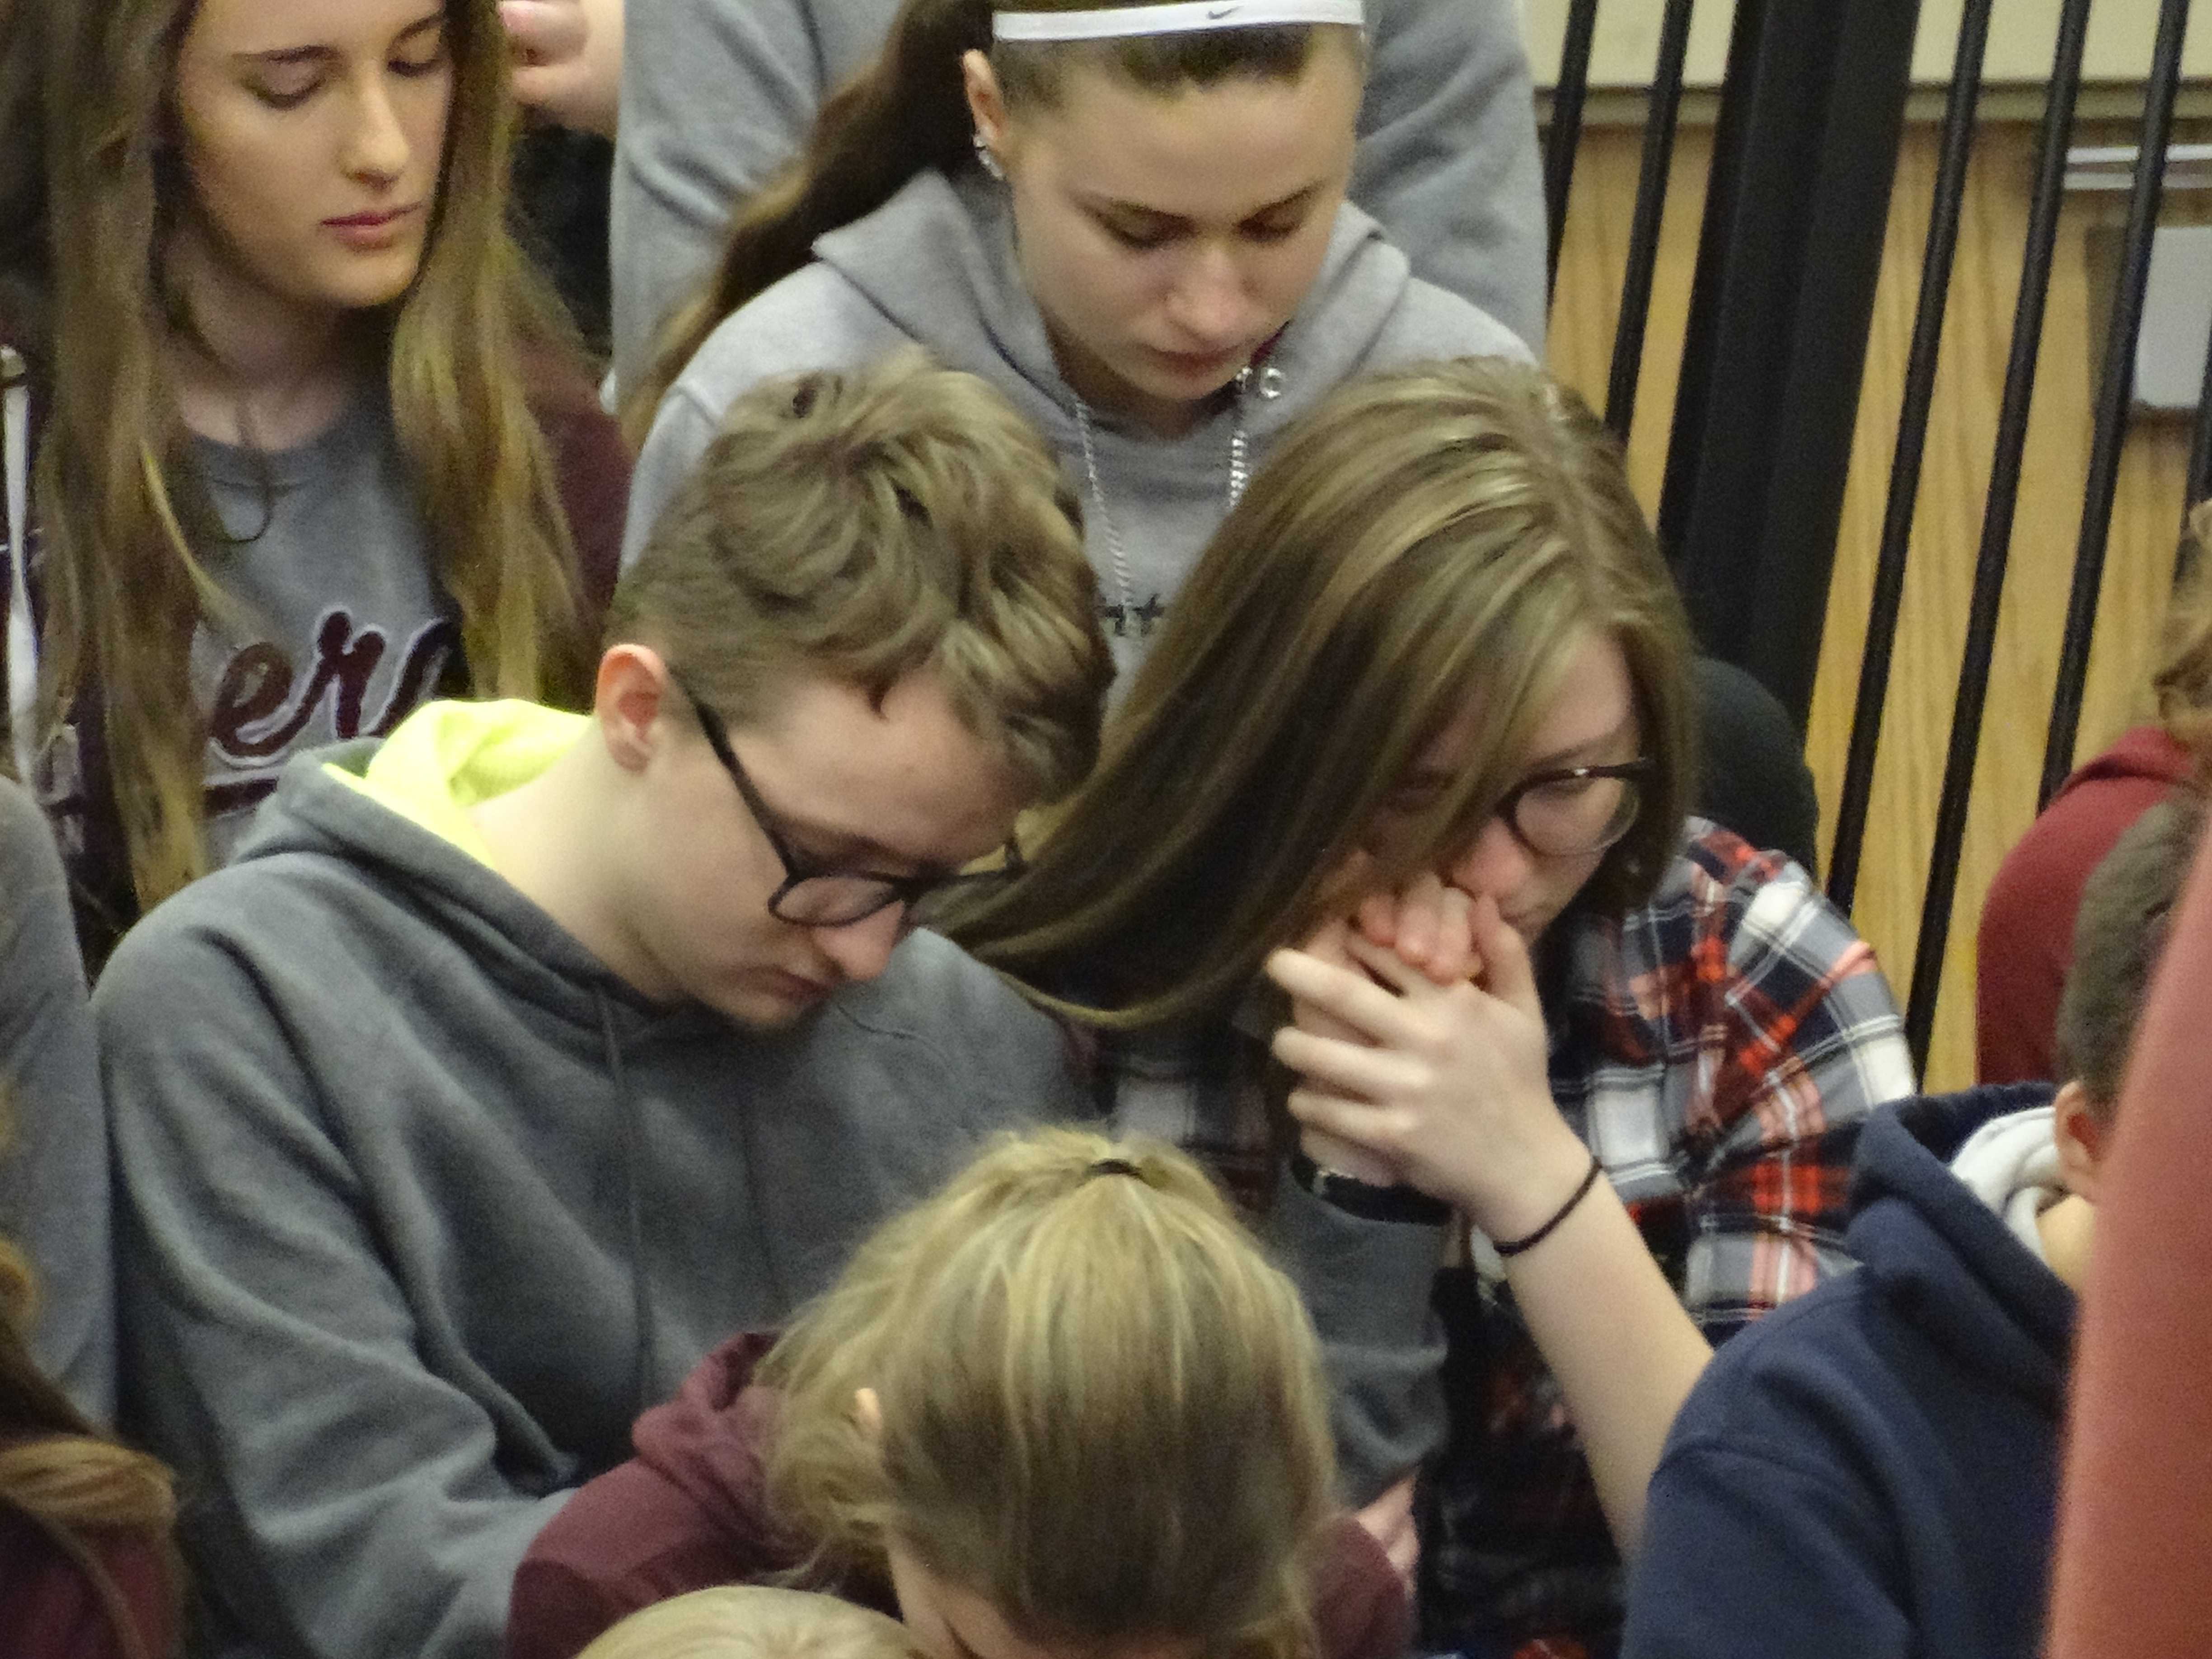 Two Brookfield High School students reach out to each other for support during the reading of victim biographies during the school's observance of National Walkout Day March 14.